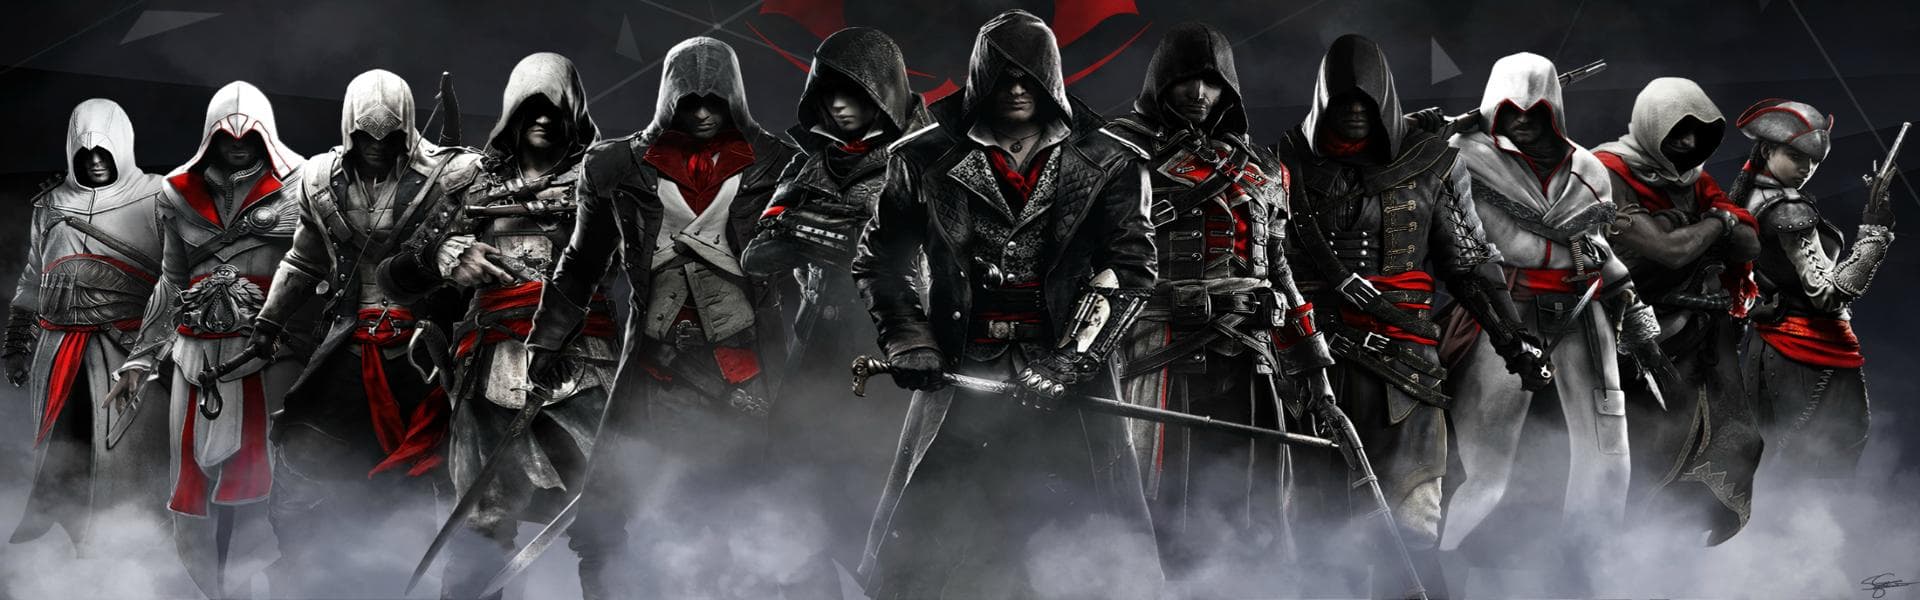 assassin's creed banner 2